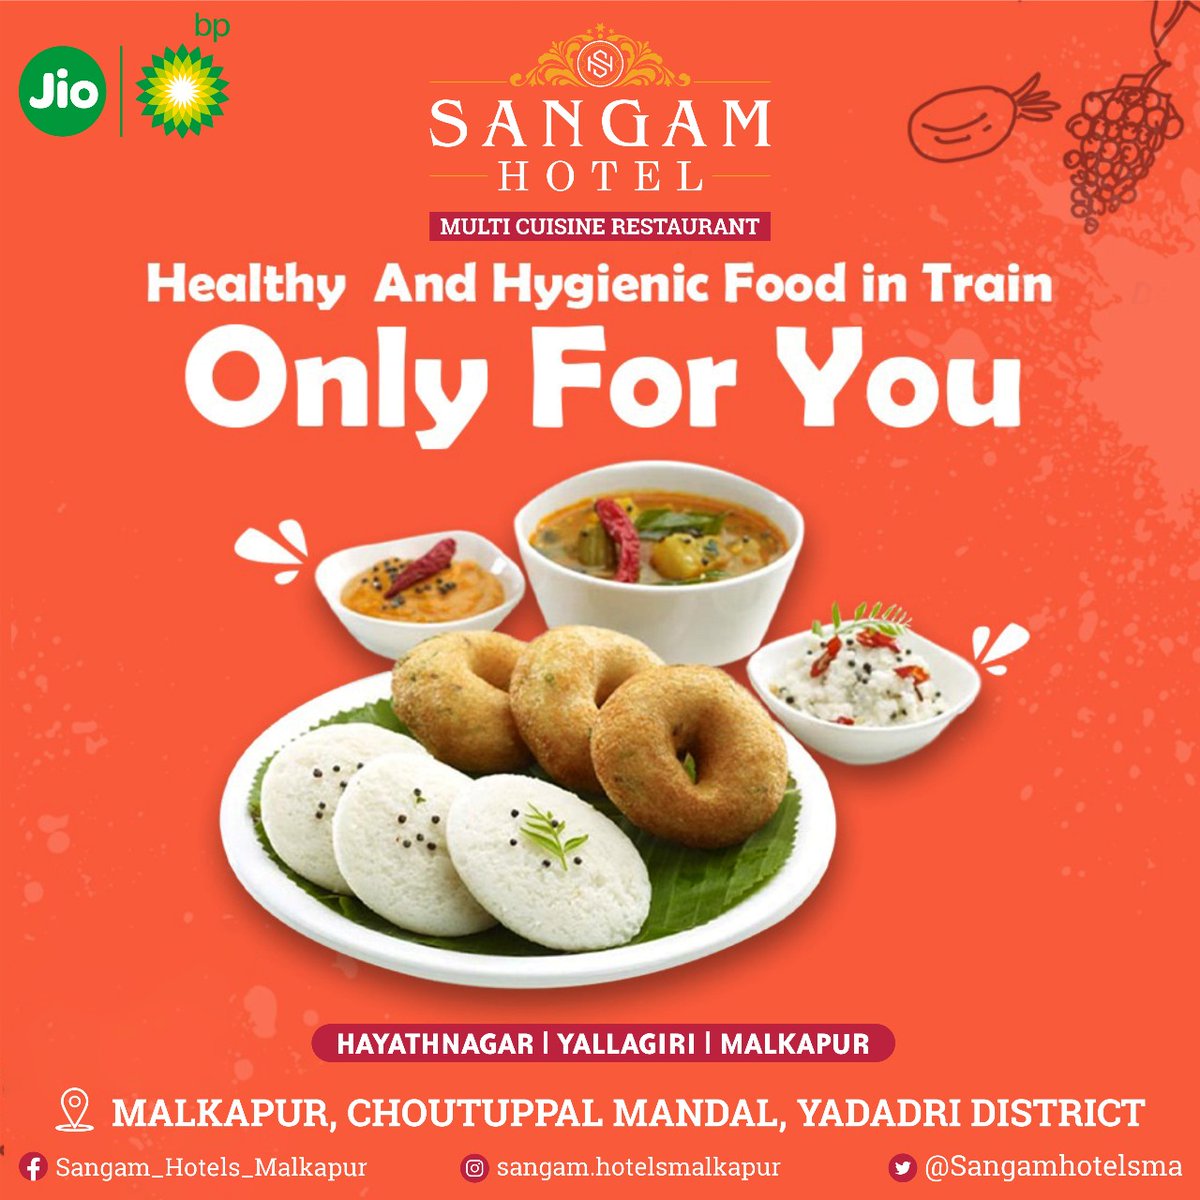 Healthy and Hygienic food in Train Only For You! @Sangamhotelsma #breakfast #food #foodie #foodporn #instafood #lunch #healthyfood #yummy #foodphotography #delicious #brunch #dinner #coffee #foodblogger #foodstagram #homemade #instagood #healthy #breakfastideas #foodlover